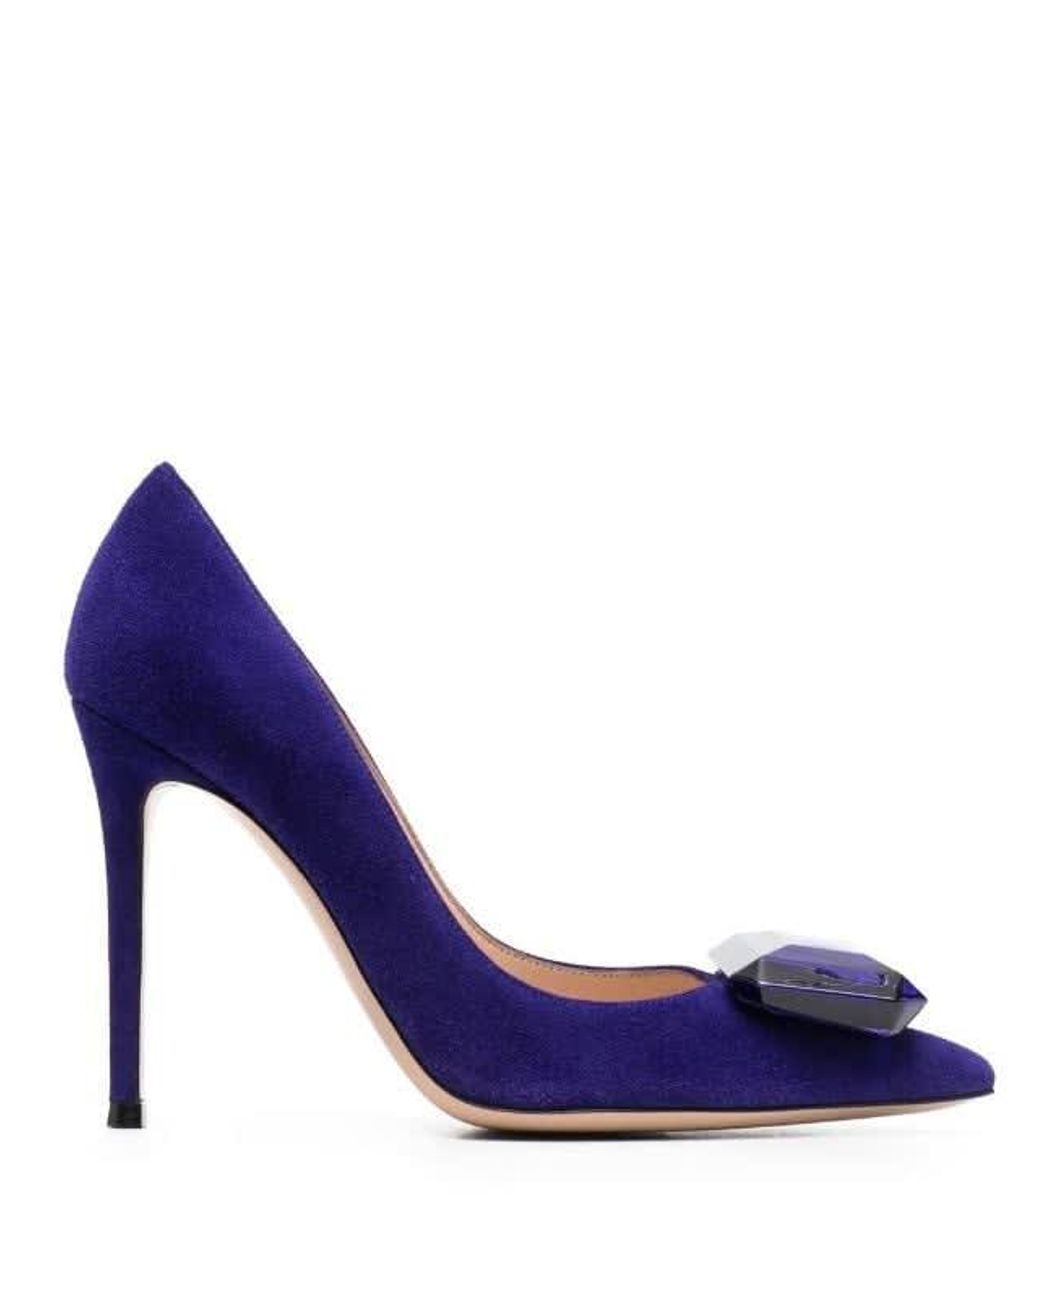 Gianvito Rossi Suede 105mm Pumps in Blue | Lyst